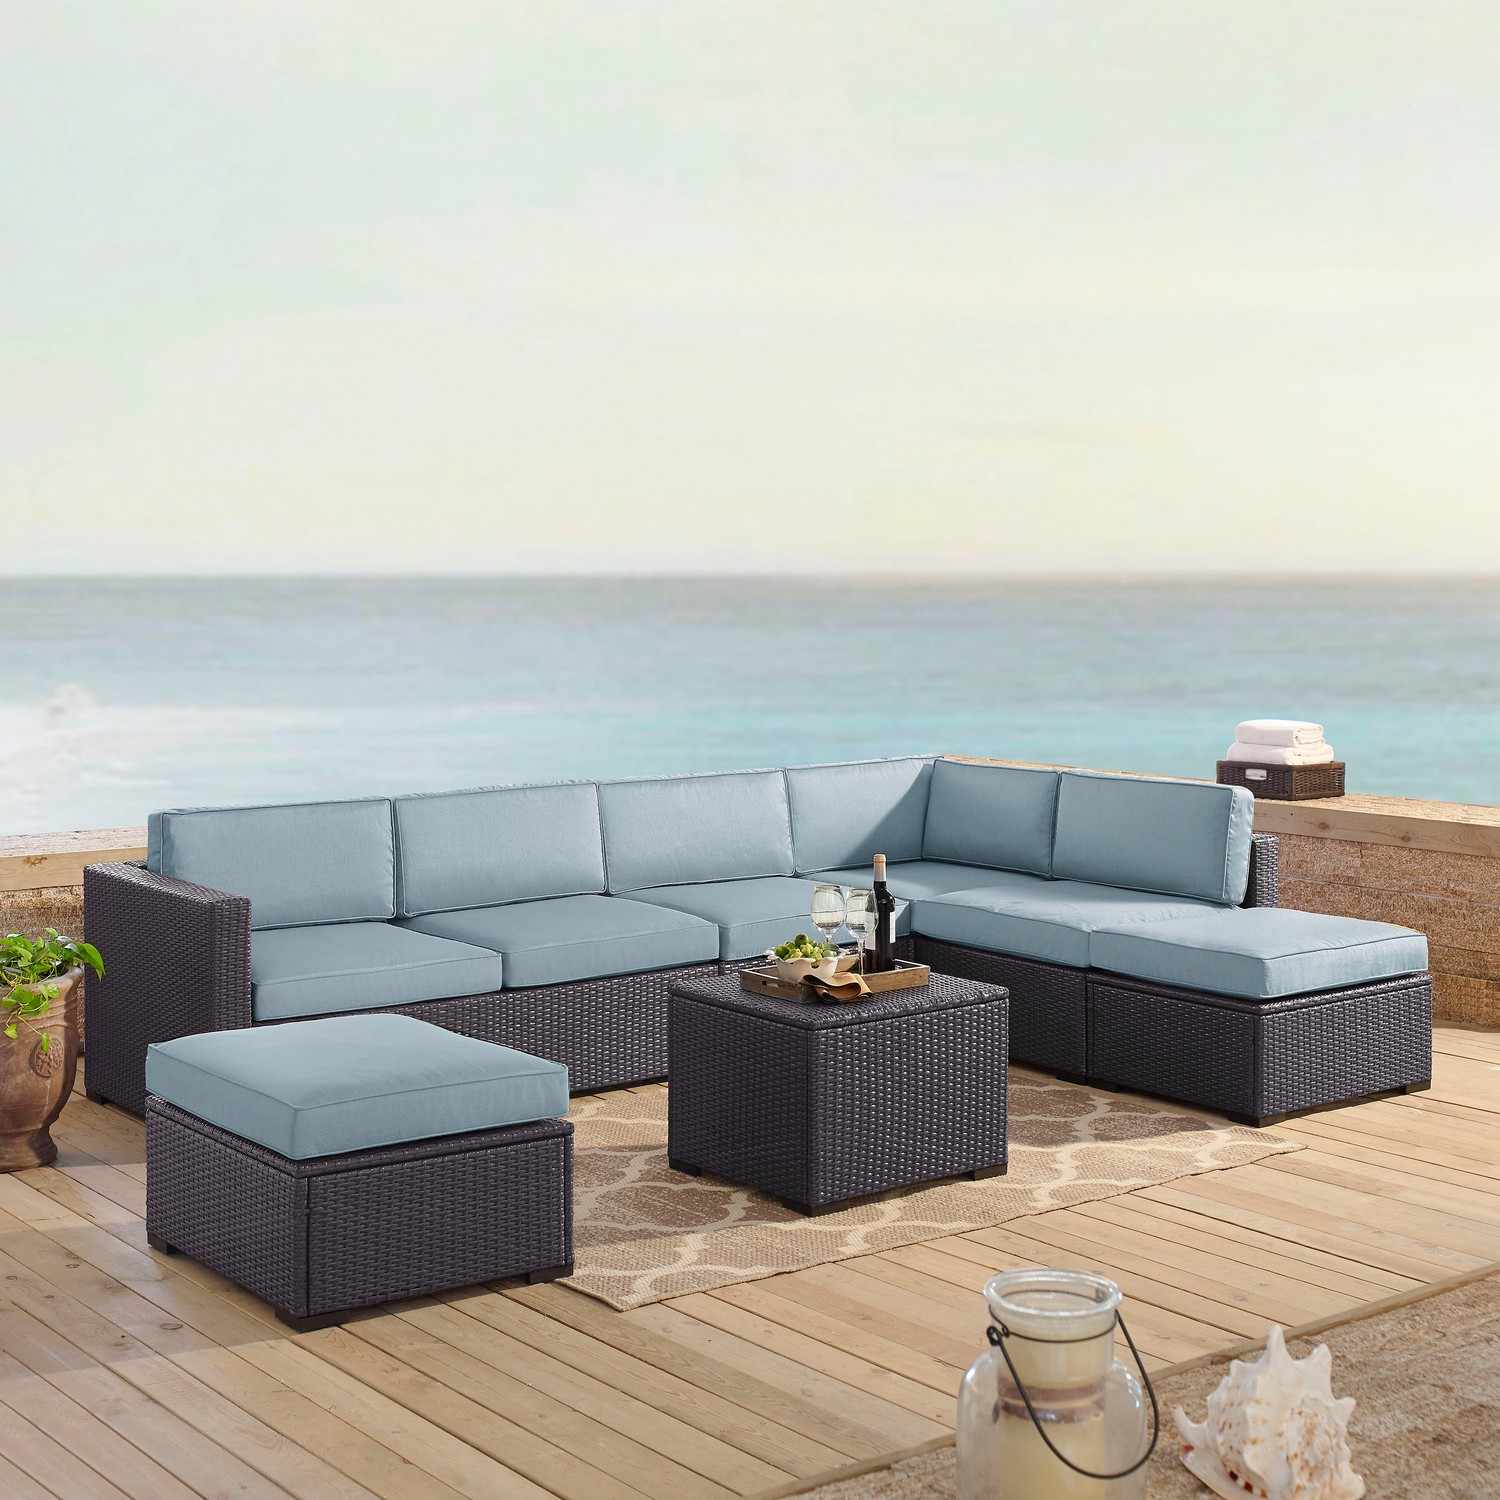 Crosley Biscayne 6-PC Outdoor Wicker Sectional Set - 2 Loveseats, Armless Chair, Coffee Table, 2 Ottomans - Mist/Brown